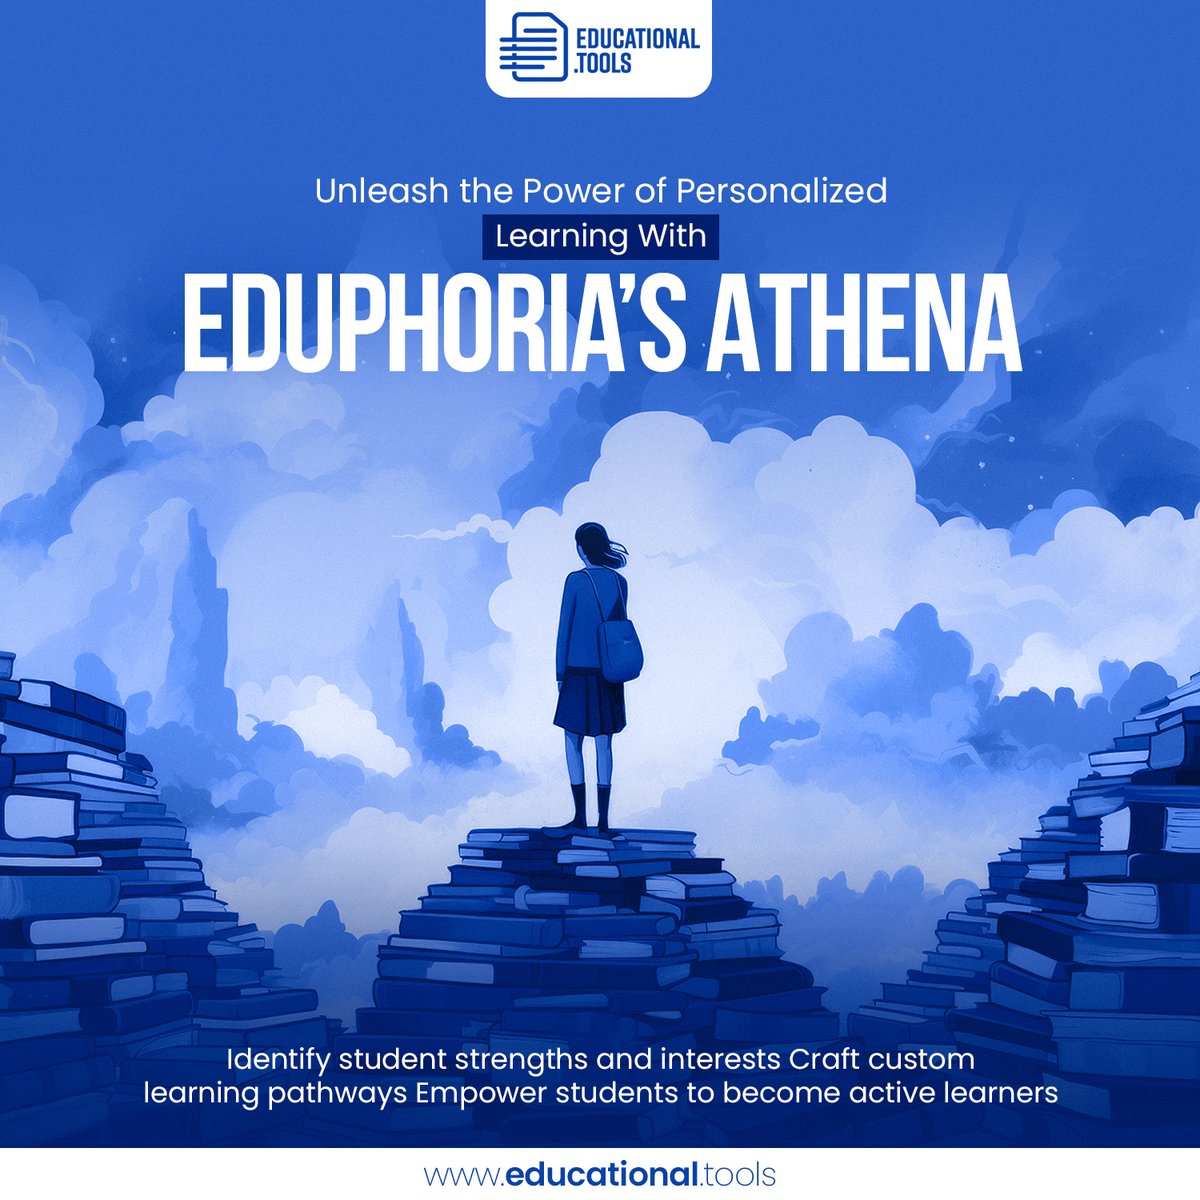 Unlock personalized education with eduPhoria's Athena AI! Tailored learning journeys designed to ignite passions and unleash potential.

Know more: educational.tools/unlock-student…

#PersonalizedLearning #EduTech #AIinEducation #StudentEngagement #CustomizedLearning